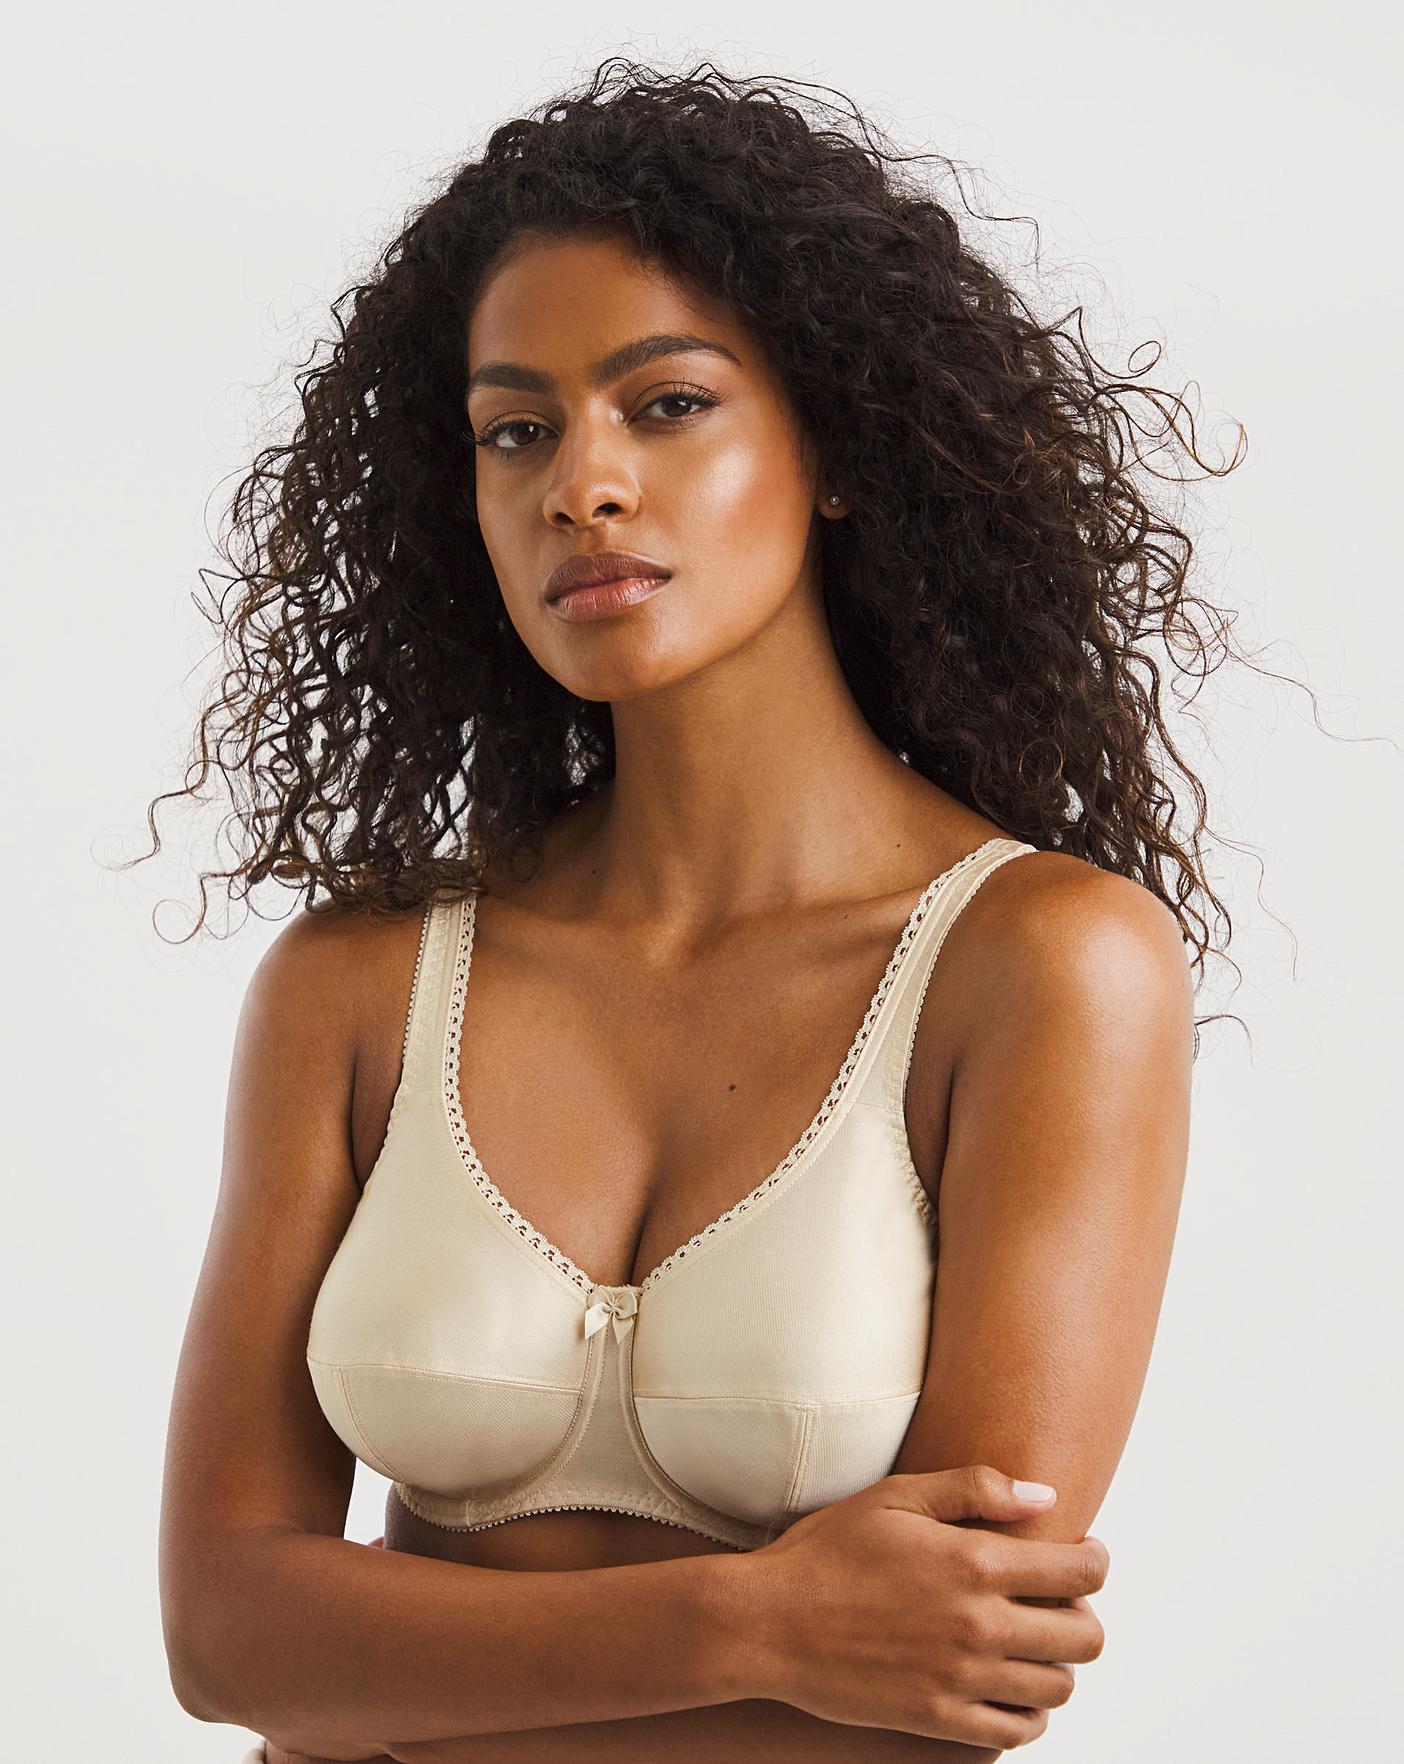 Fantasie Speciality Smooth cup bra